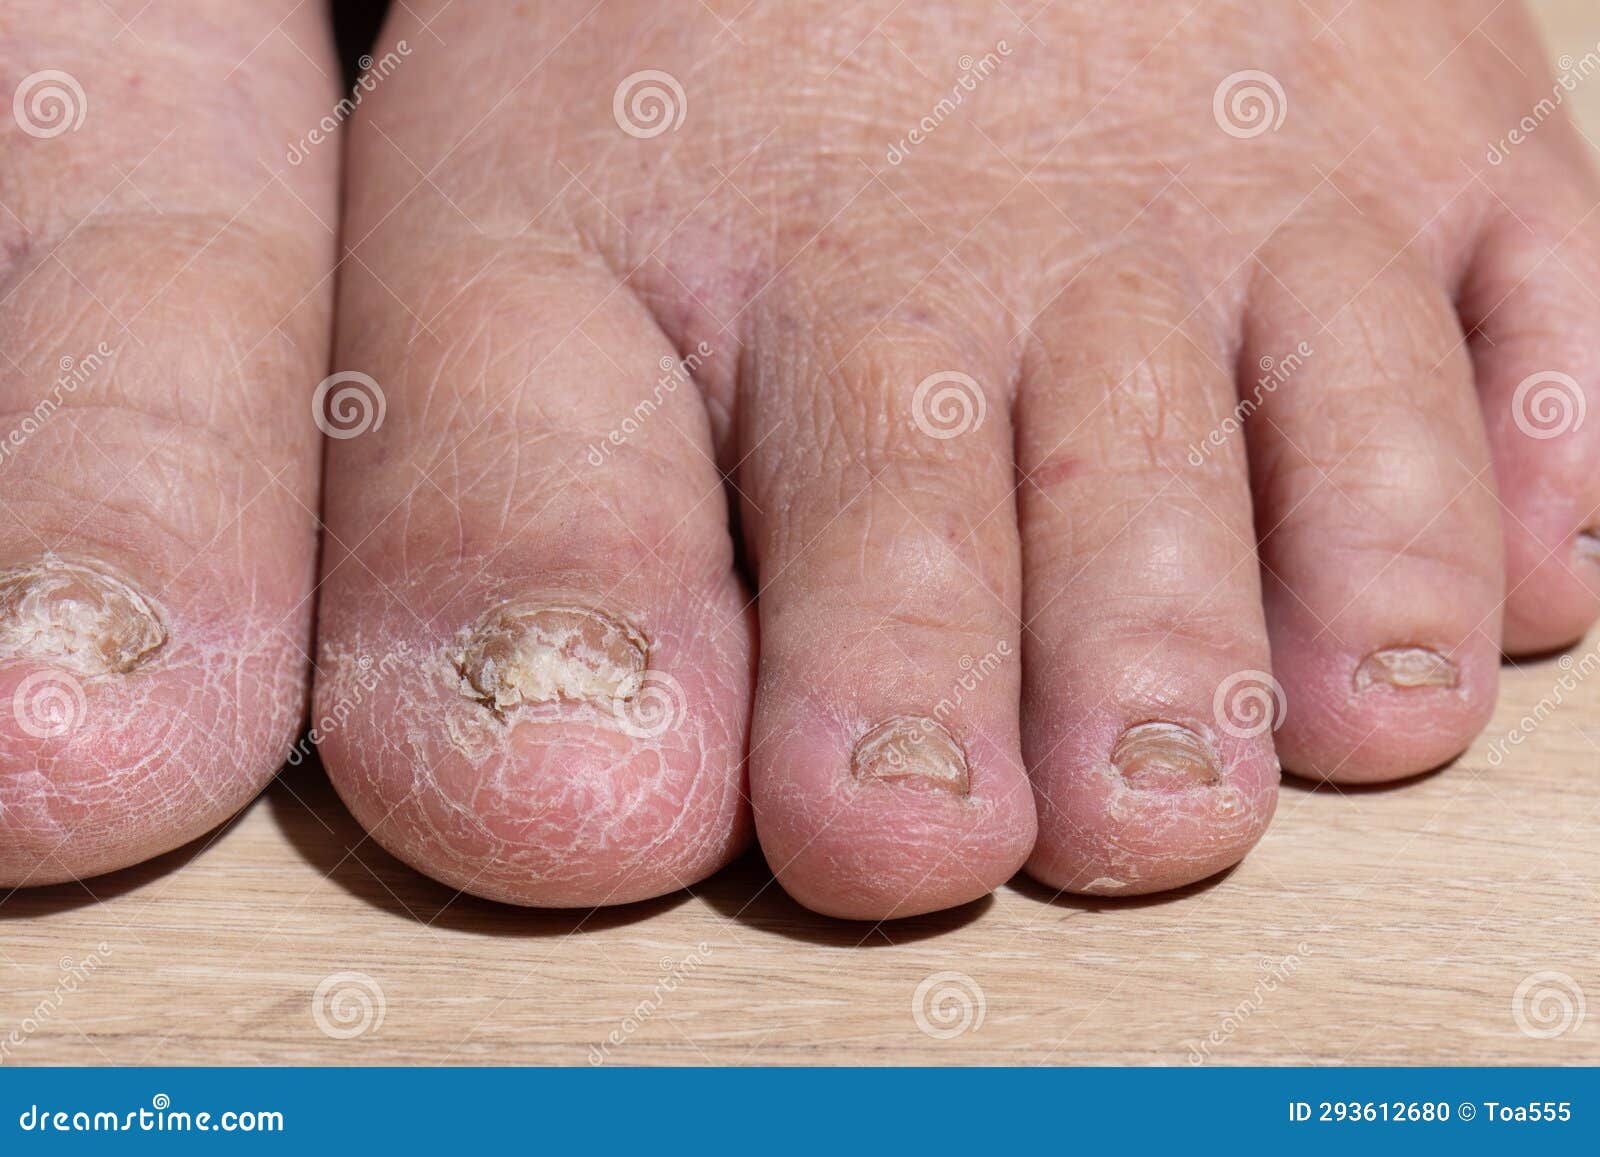 cancer chemotherapy cause swelling of ankles . skin to become dry, dark or peel and nails brittle or flaky